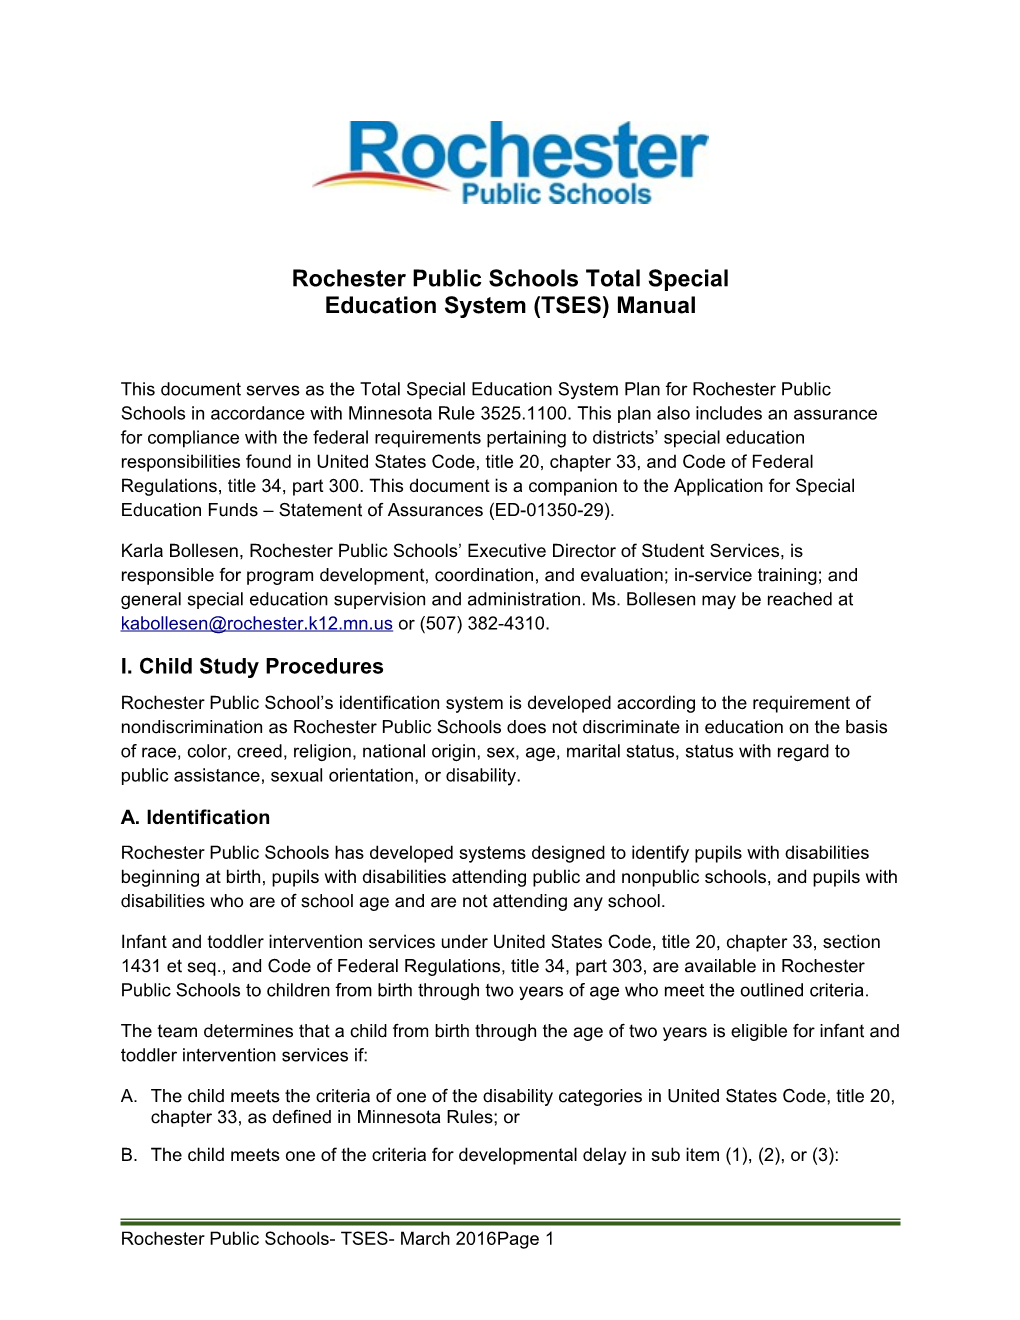 Rochester Public Schools Total Special Education System (TSES) Manual